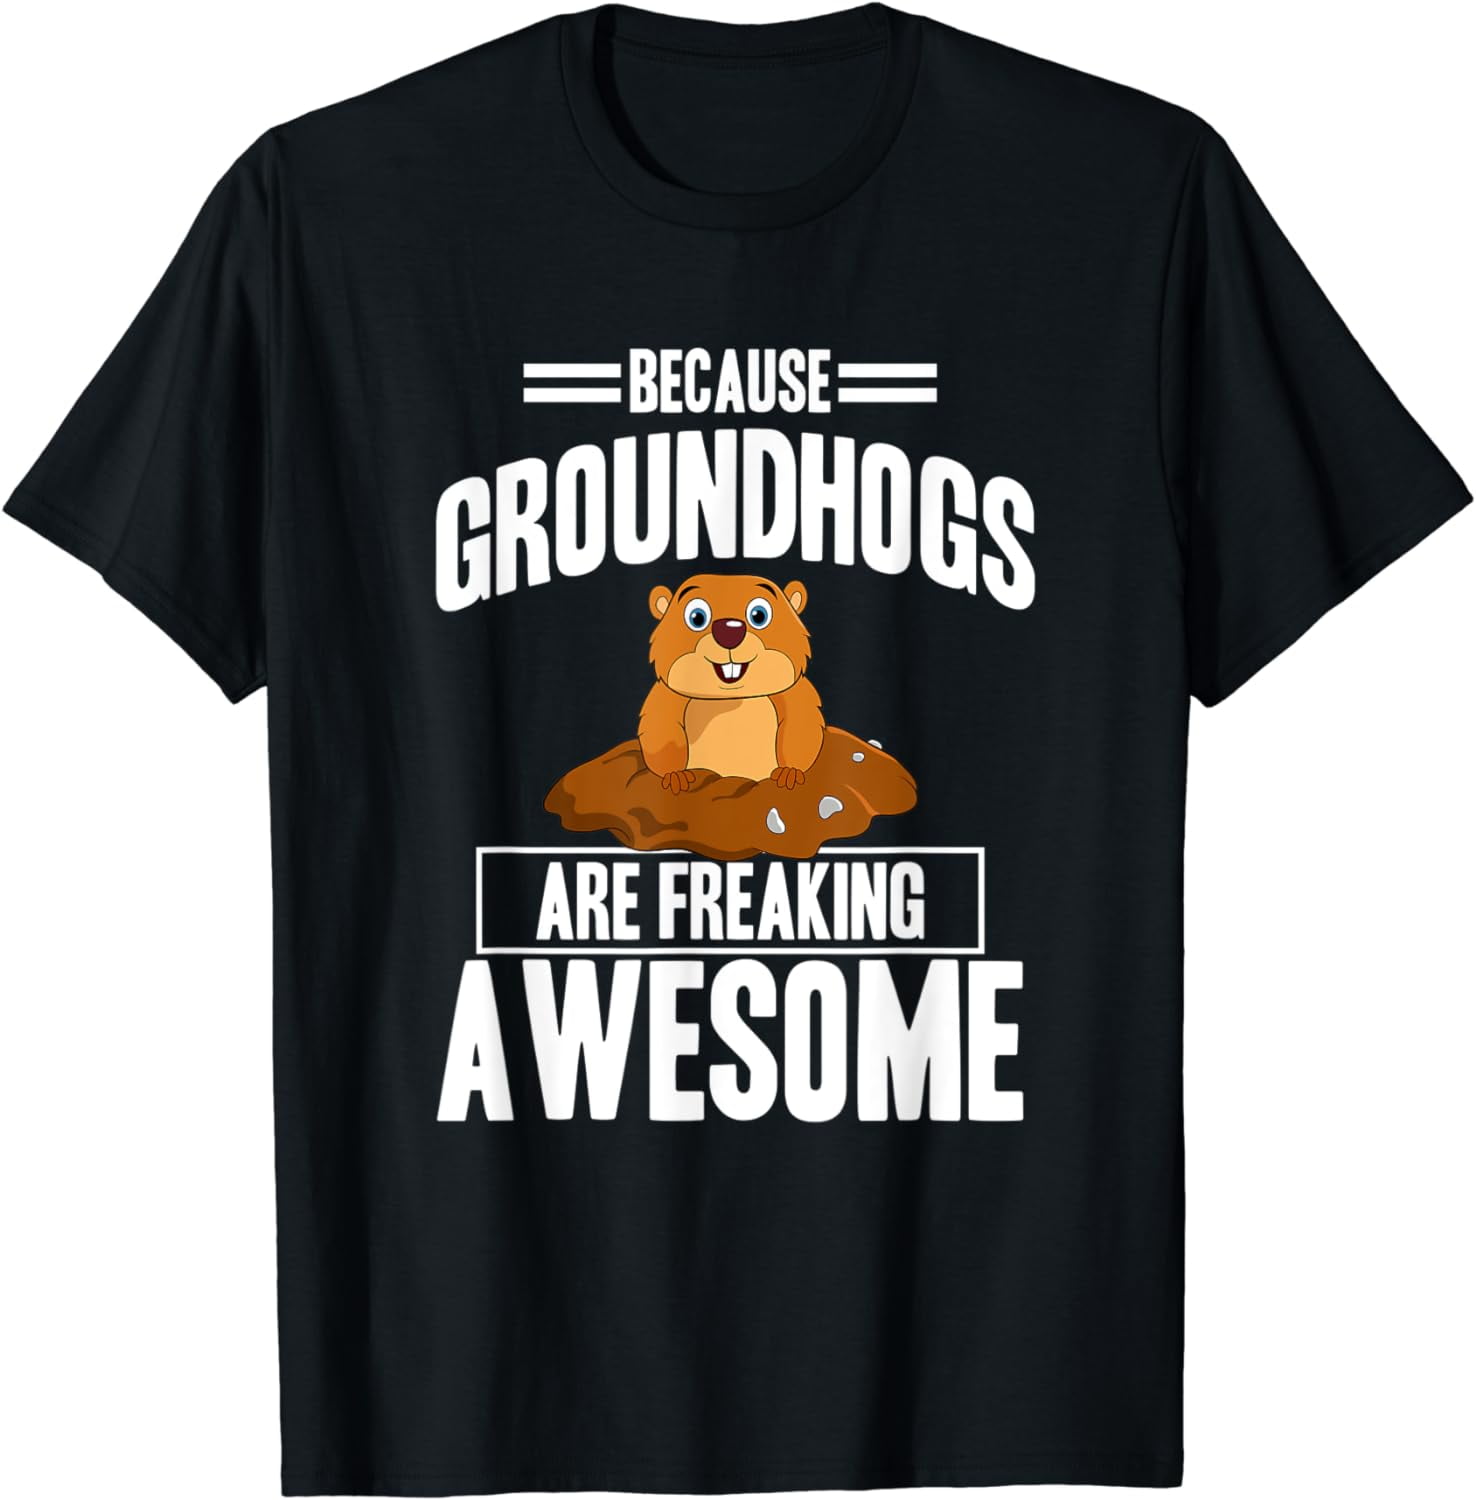 Groundhog Day Because Groundhogs Are Freaking Awesome T-Shirt - Walmart.com